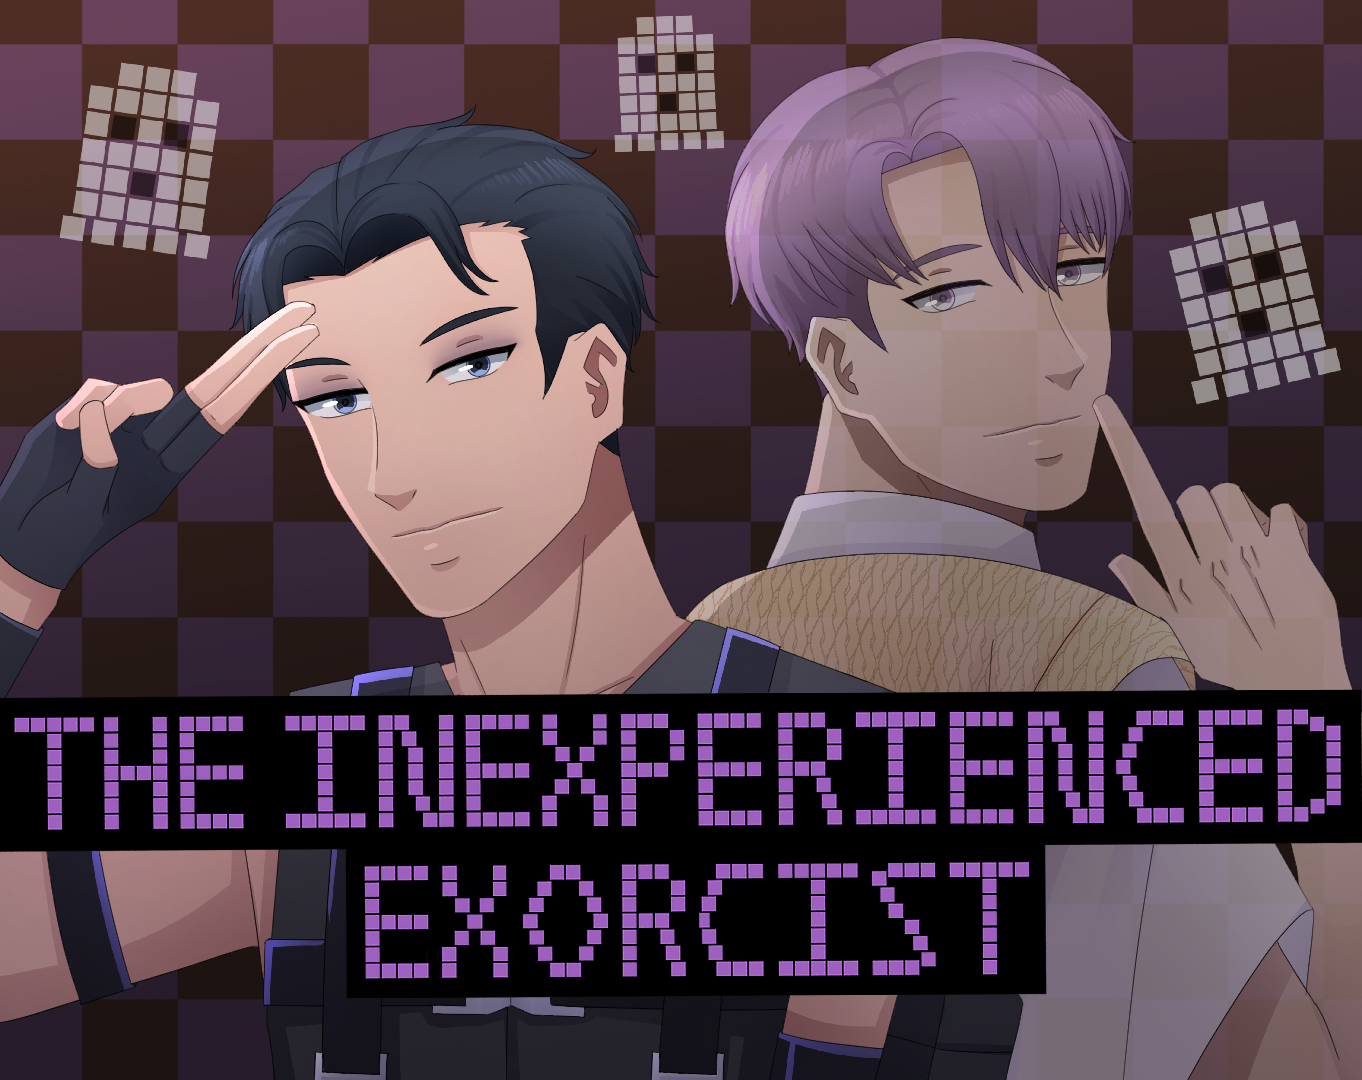 The Inexperienced Exorcist [BL RPG]